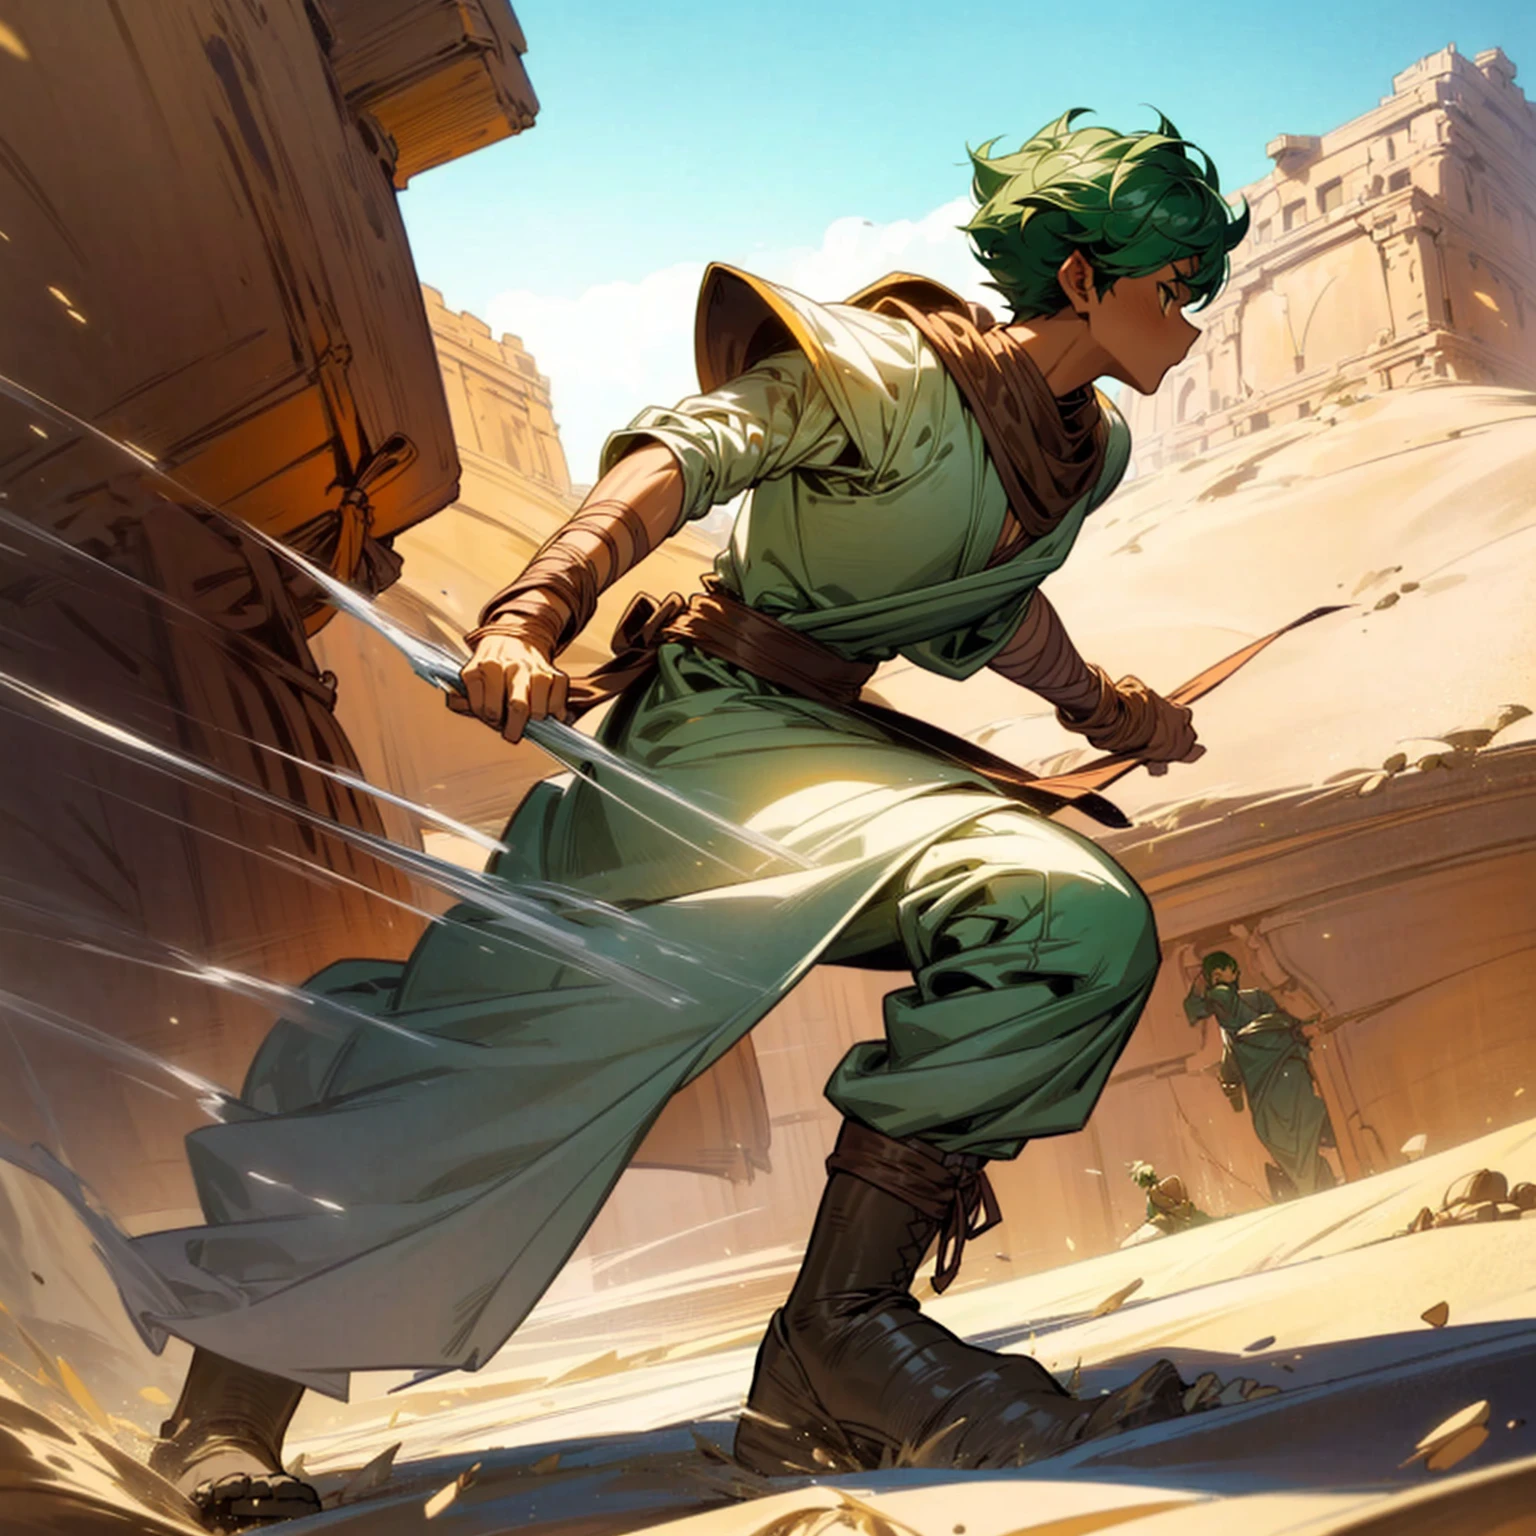 1boy, Full body version, 1character, (sand wanderer), brown eyes color, dark skin, (Curly cut hairstyle), small eyes type, green colour hair, doctor ancient roman clothing style, white color clothing, dark green robe, Ancient roman boots, armor vest, sands in two hand, Grassroots background in desert, (battle, battle gesture, battle poses, view character on small, He a sand wanderer, he controls sand with his hands, he fights enemies with sand, enemies, bandits, Fighting, intense battles, fighting in desert, Dynamic Pose, Motion Blur, emphasis lines, sparks, plasma, aura)